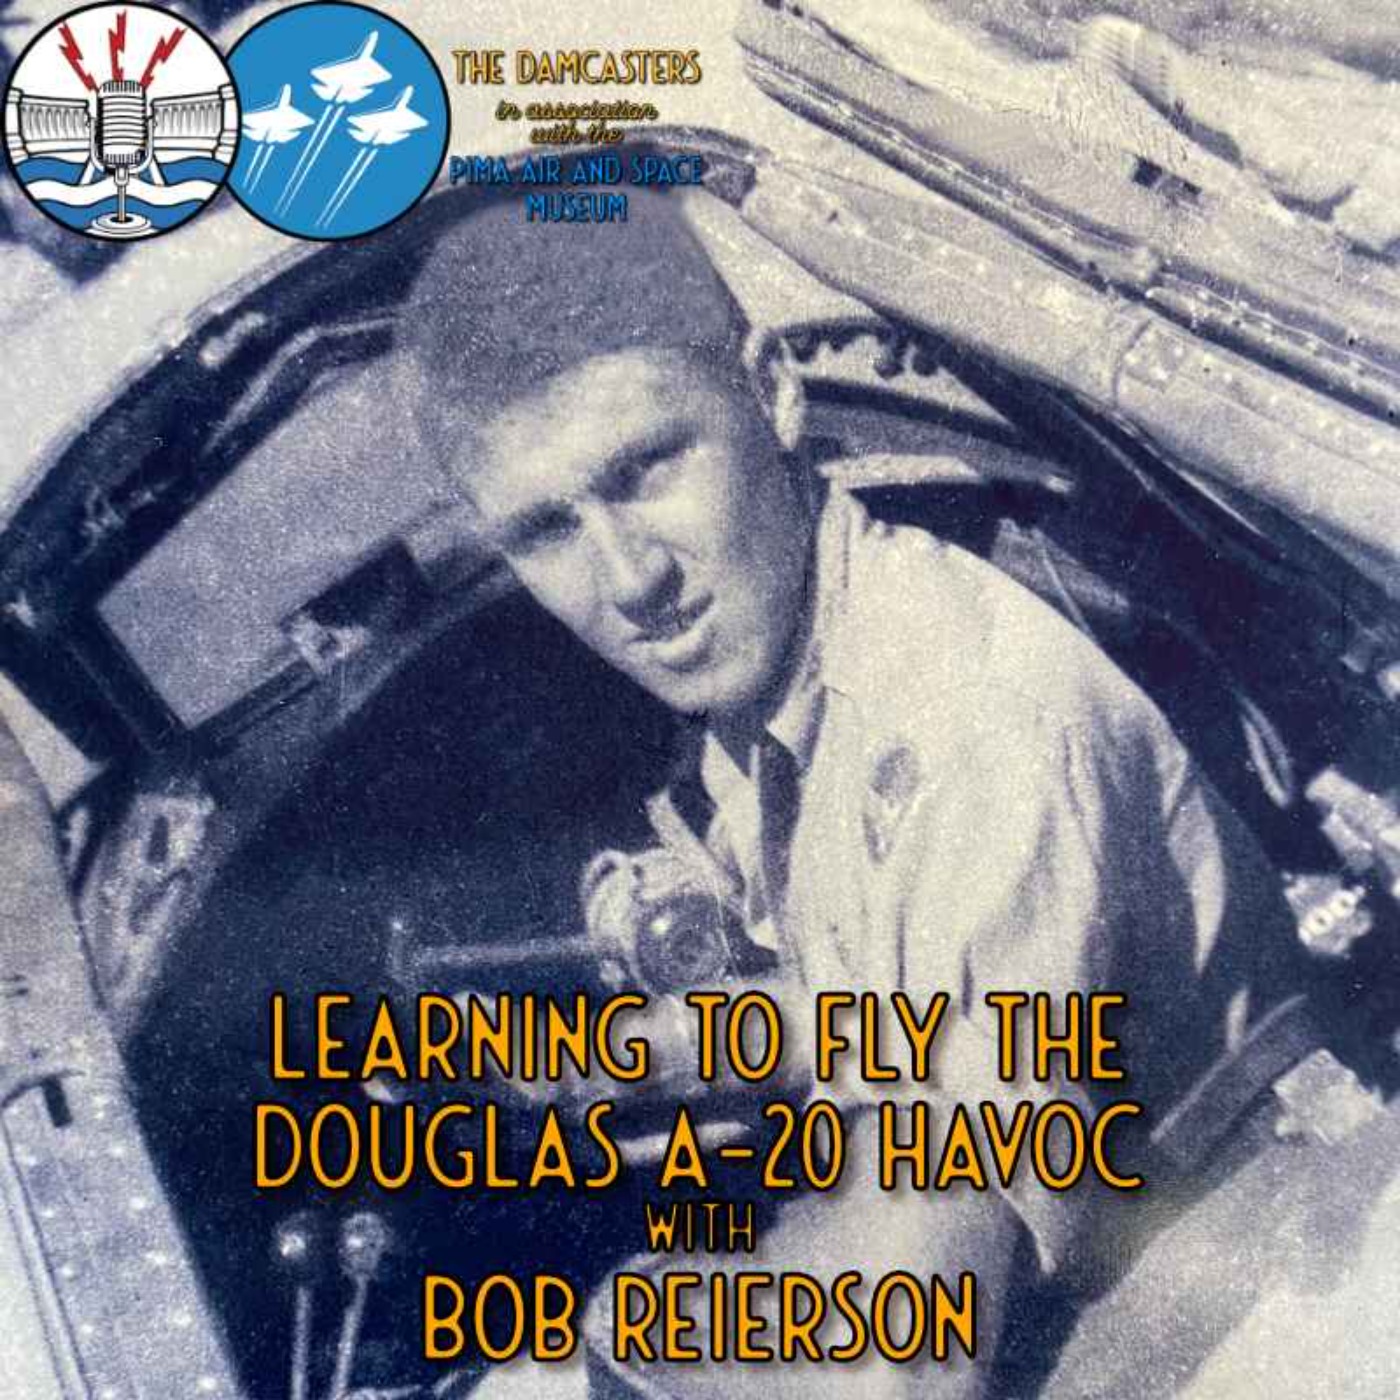 Learning to Fly the Douglas A-20 Havoc with Bob Reierson - Part 1